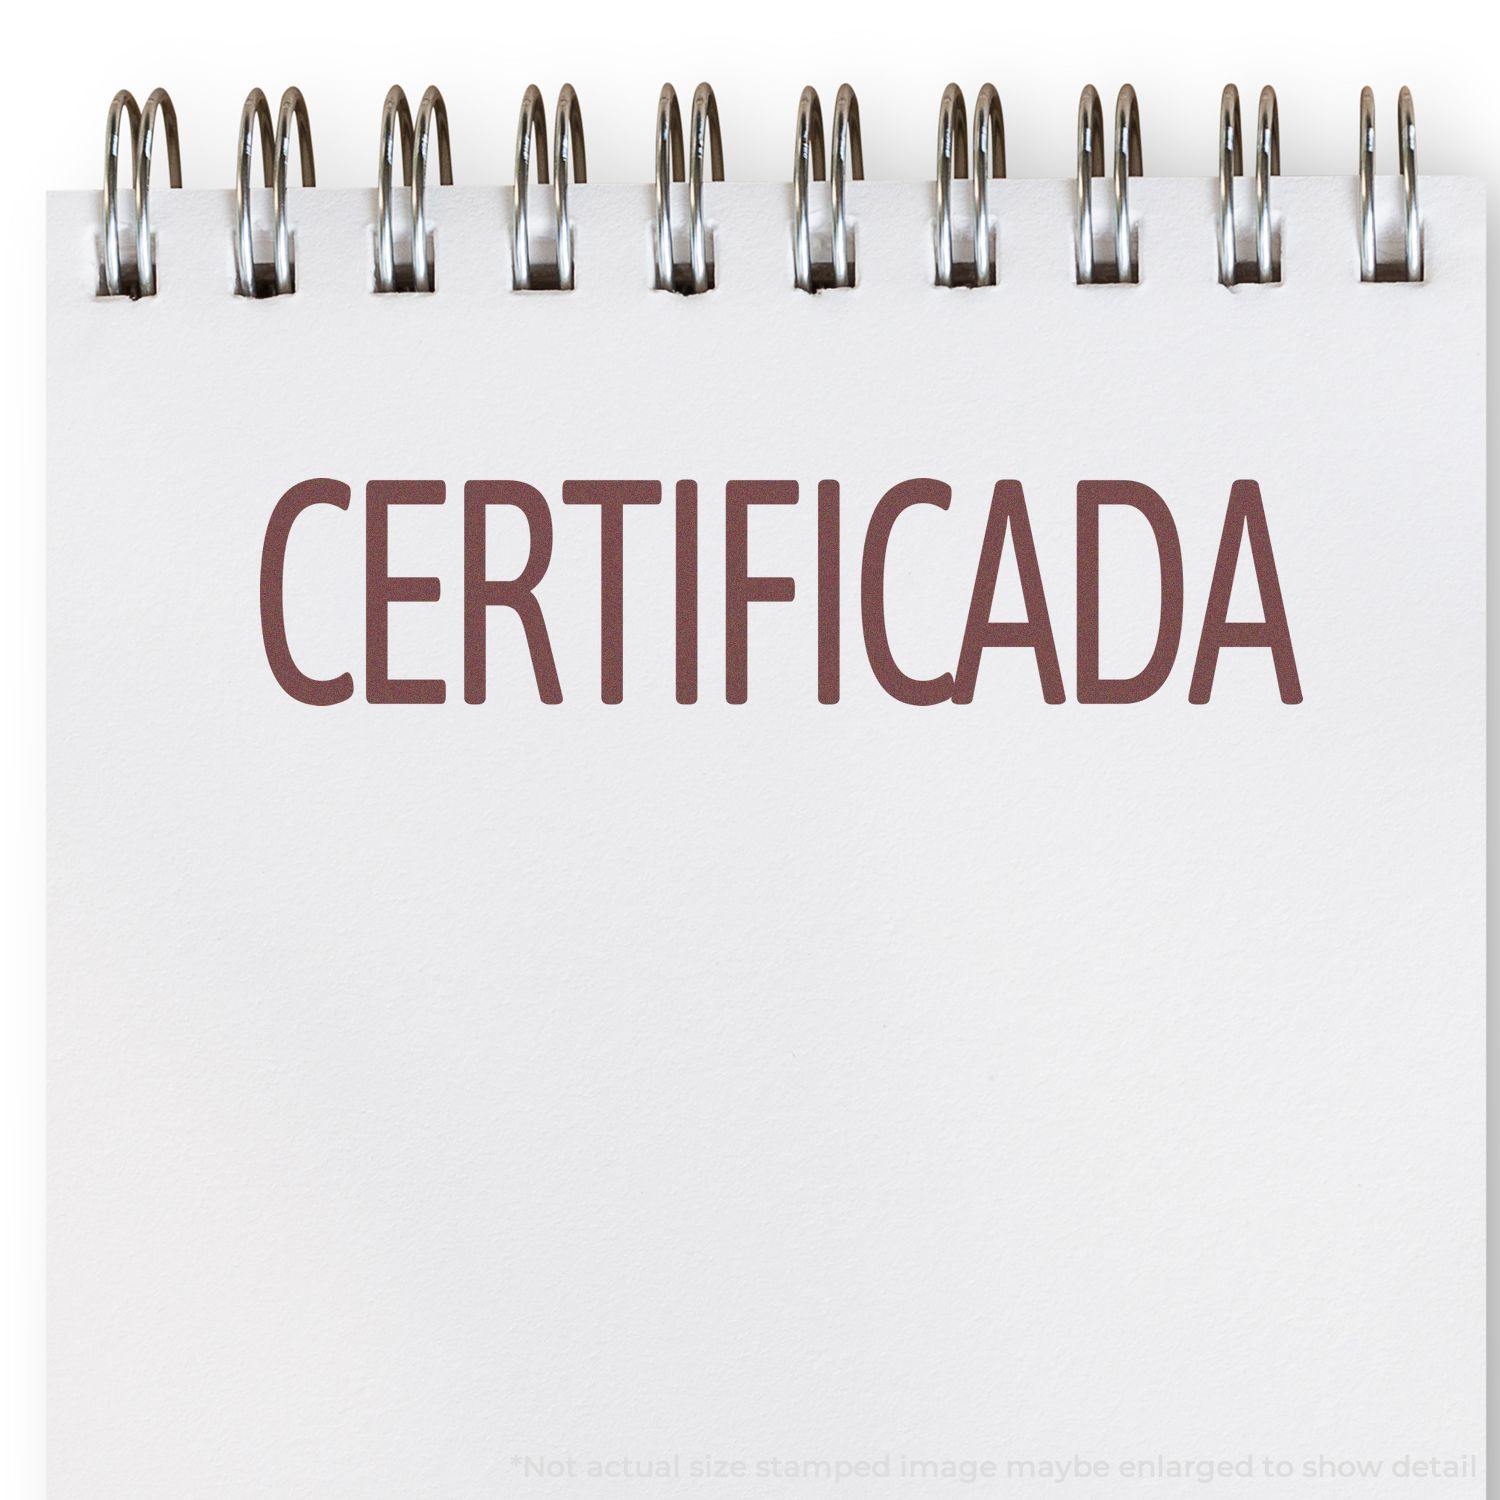 A stock office rubber stamp with a stamped image showing how the text "CERTIFICADA" is displayed after stamping.